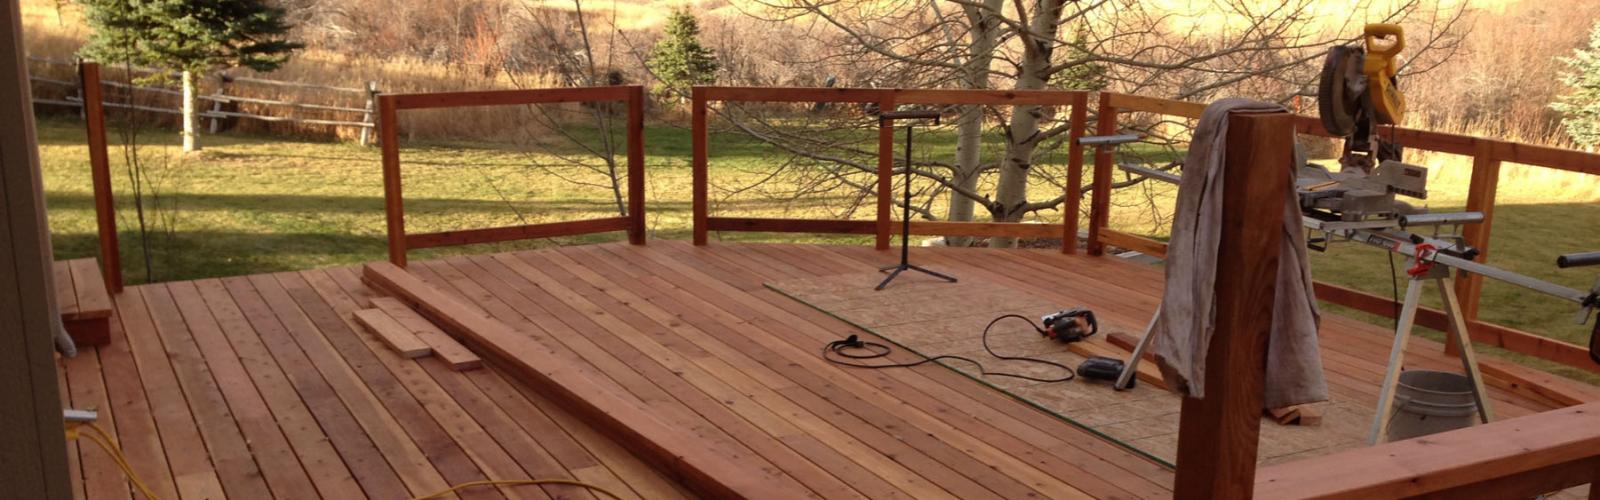 New redwood decking and railing installation